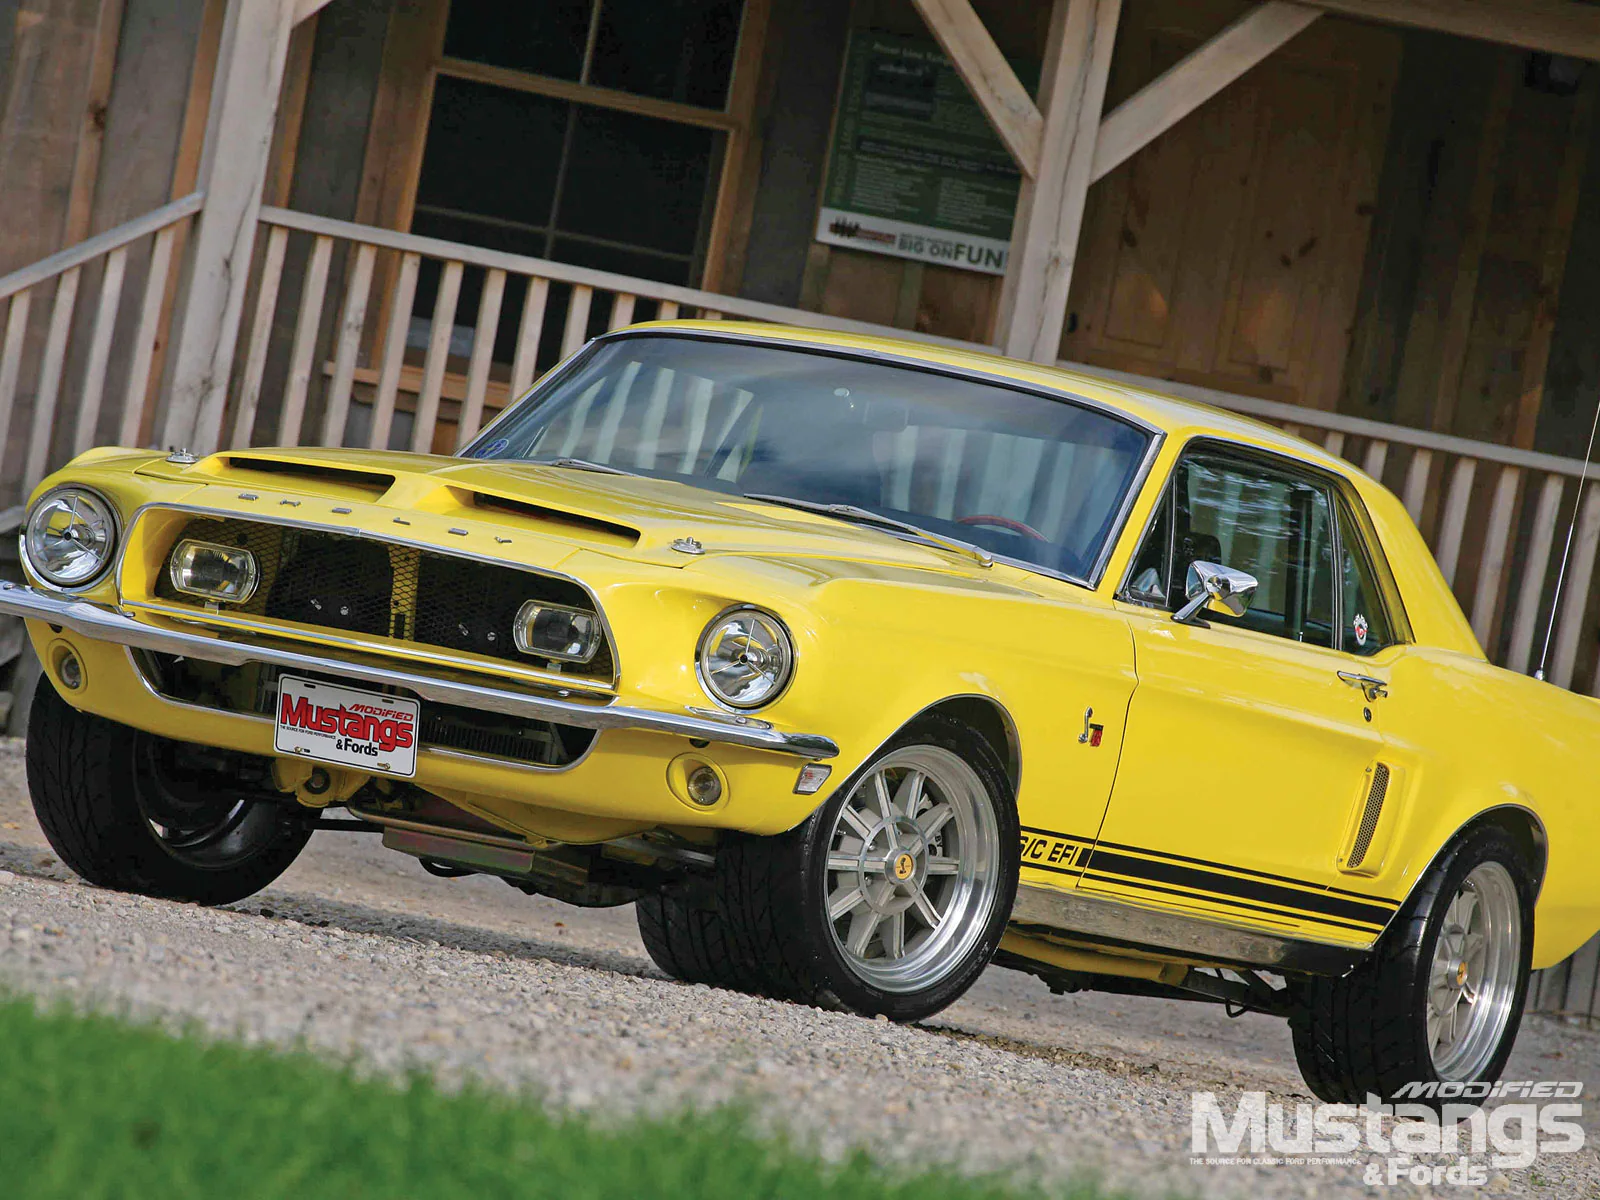 Special Yellow 1968 Ford Mustang